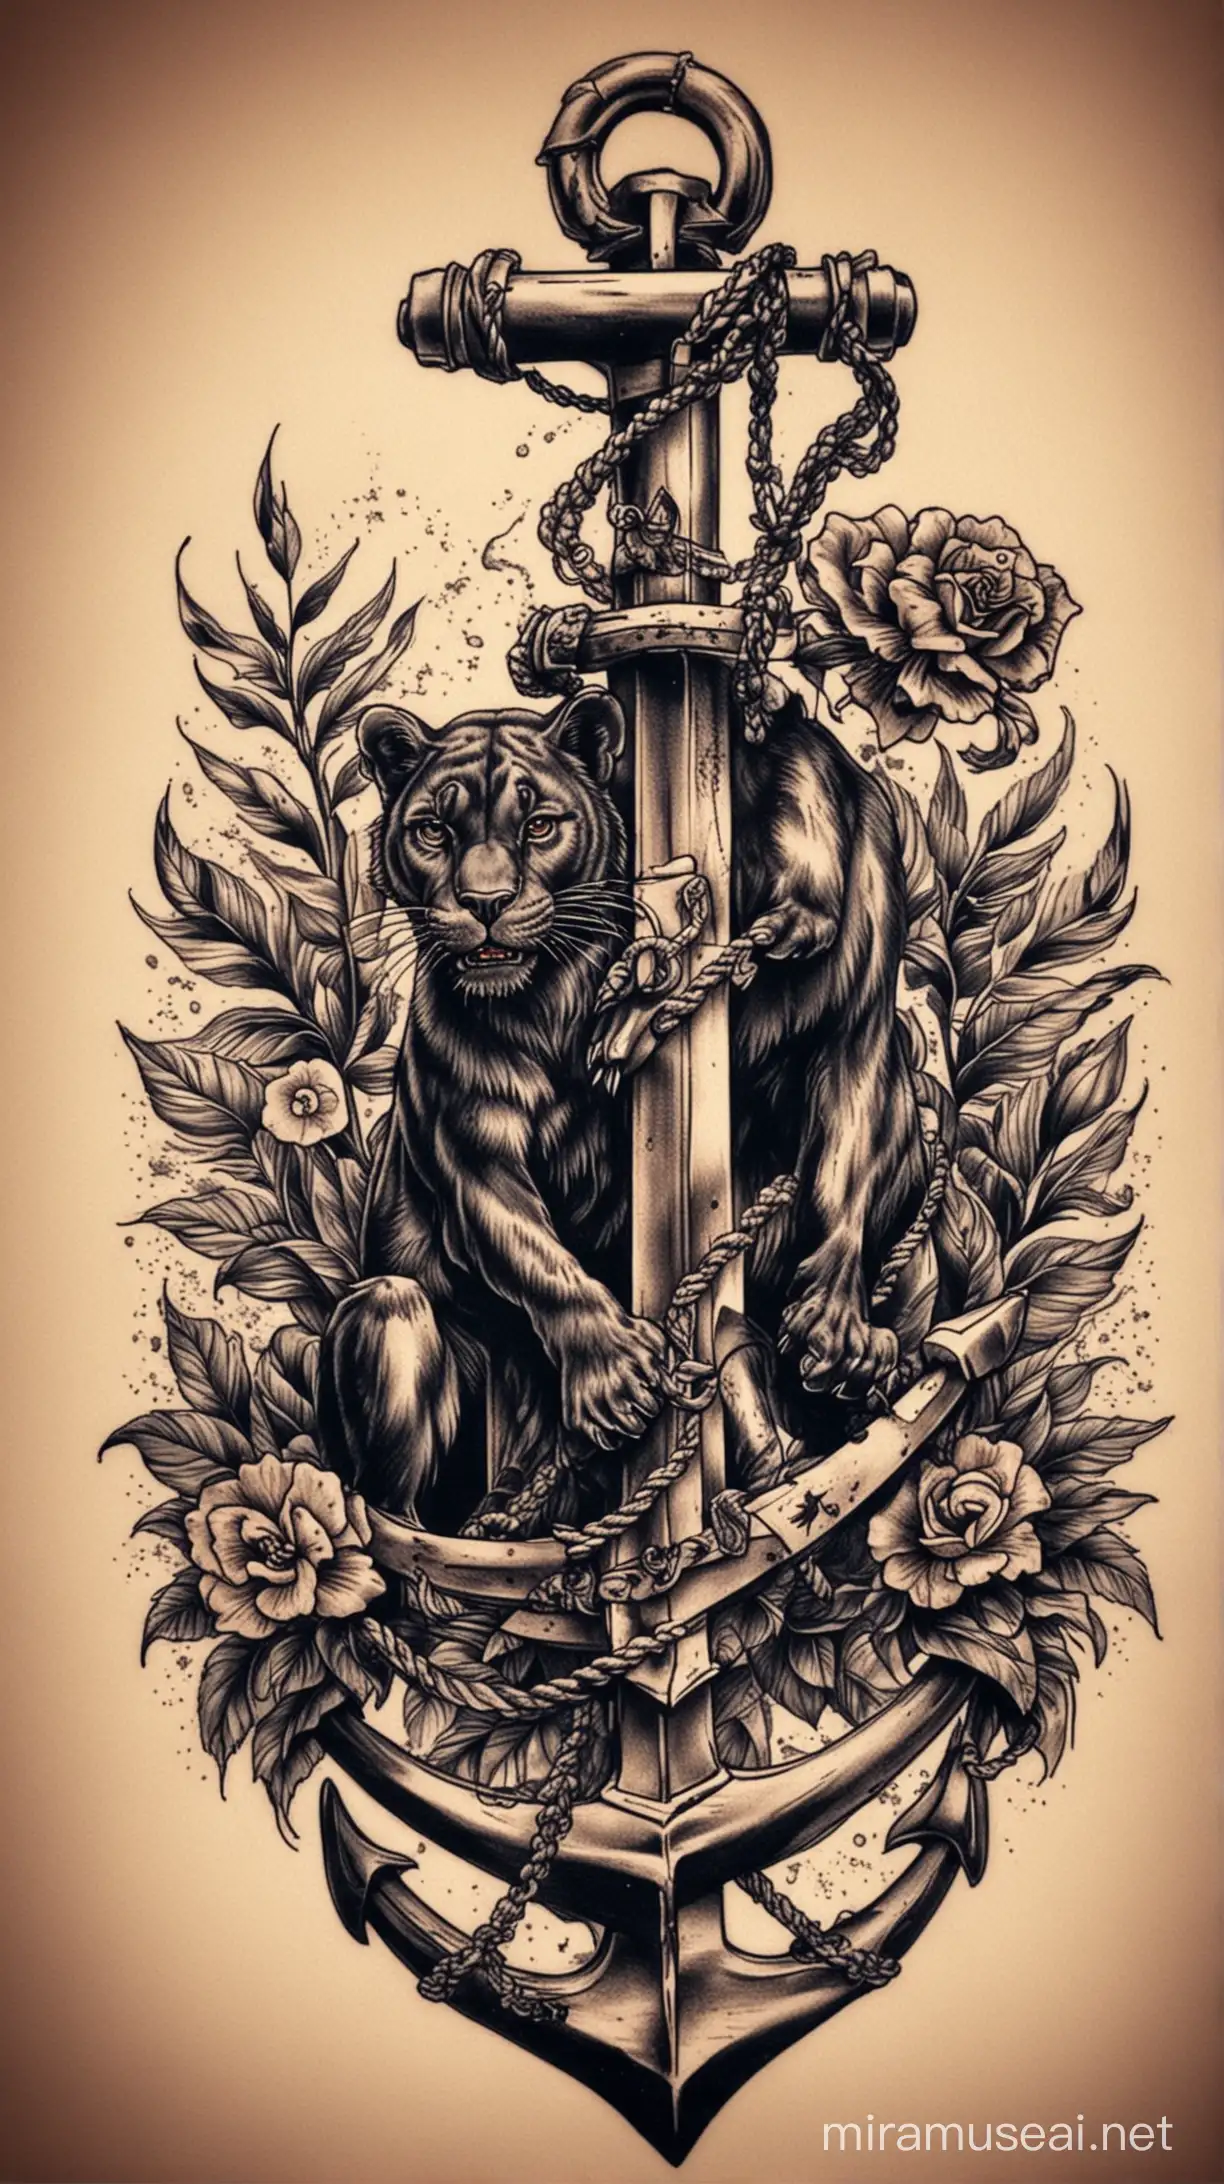 Old School Tattoo Panther Crawling on Anchor Artwork